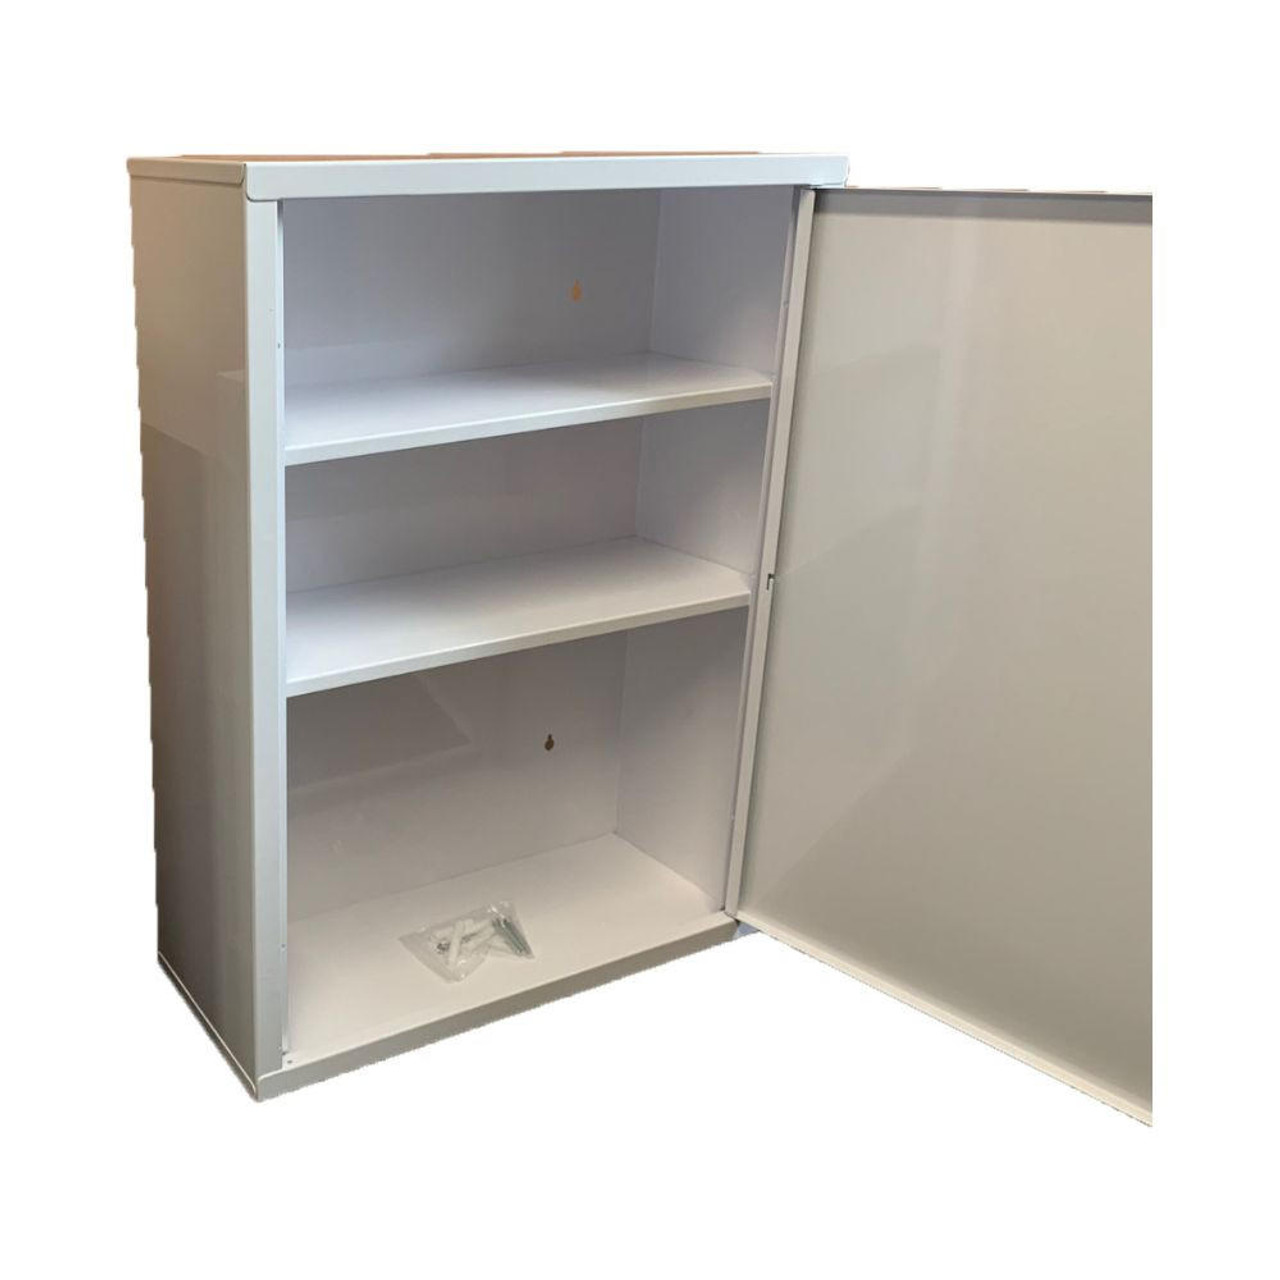  First Aid Medical Lockable Cabinet Large Single Door Cabinet 60x45x18cm 